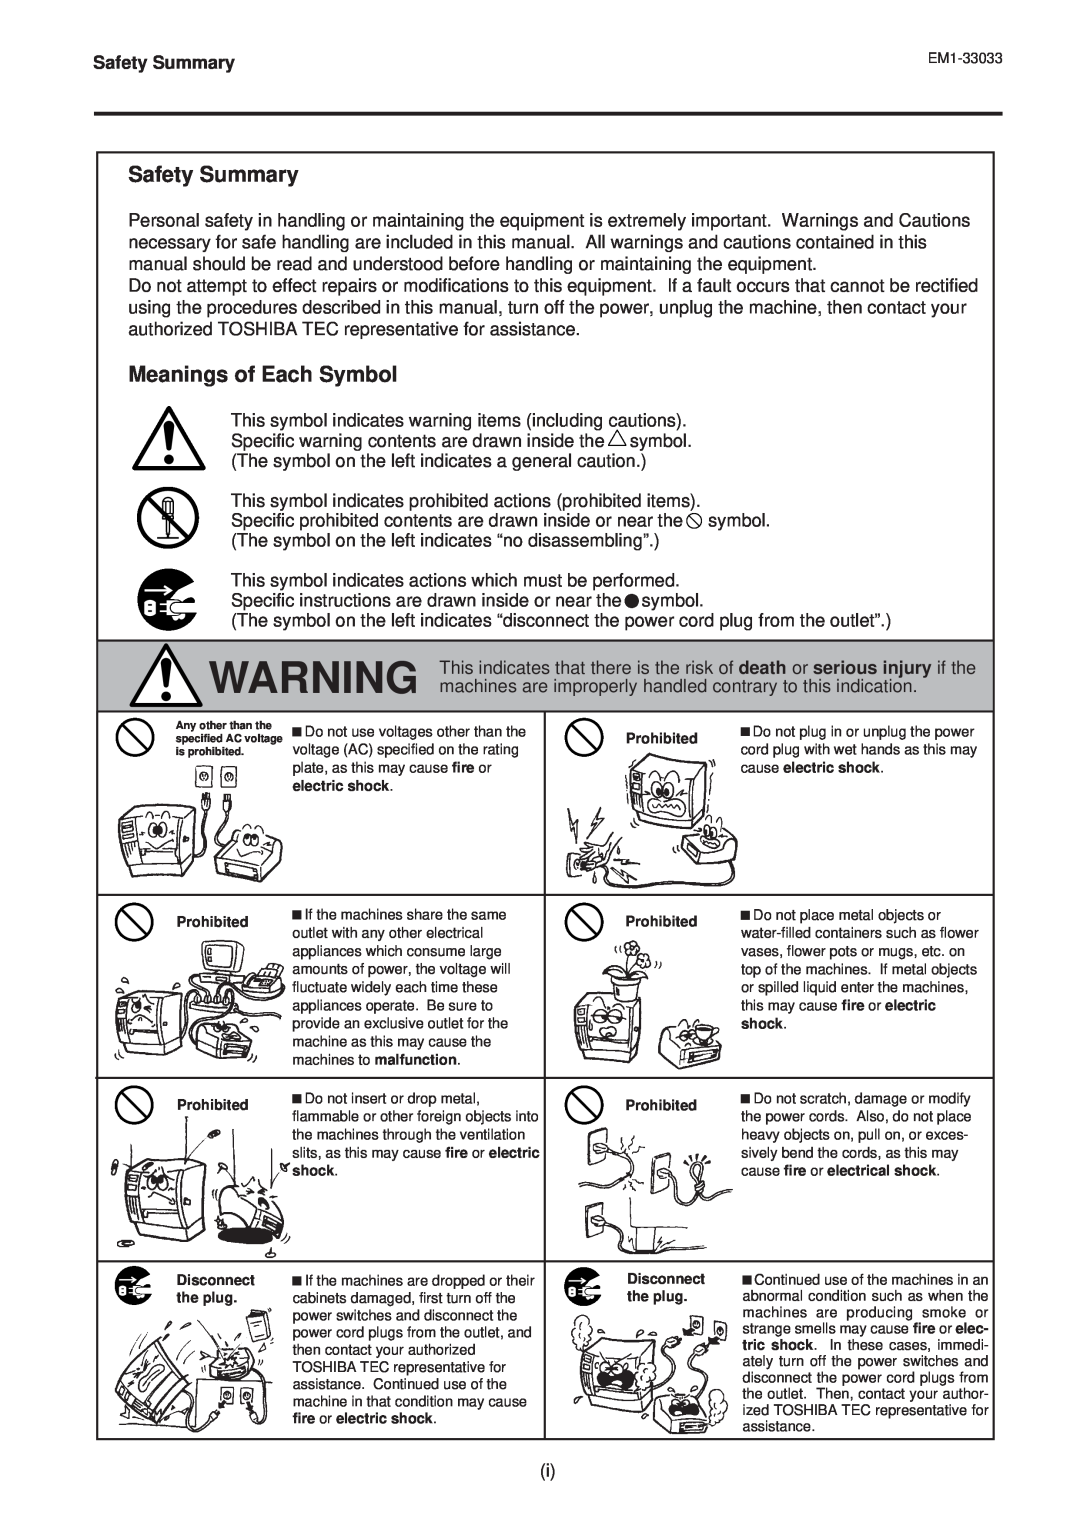 Toshiba EM1-33033E owner manual Safety Summary, Meanings of Each Symbol 